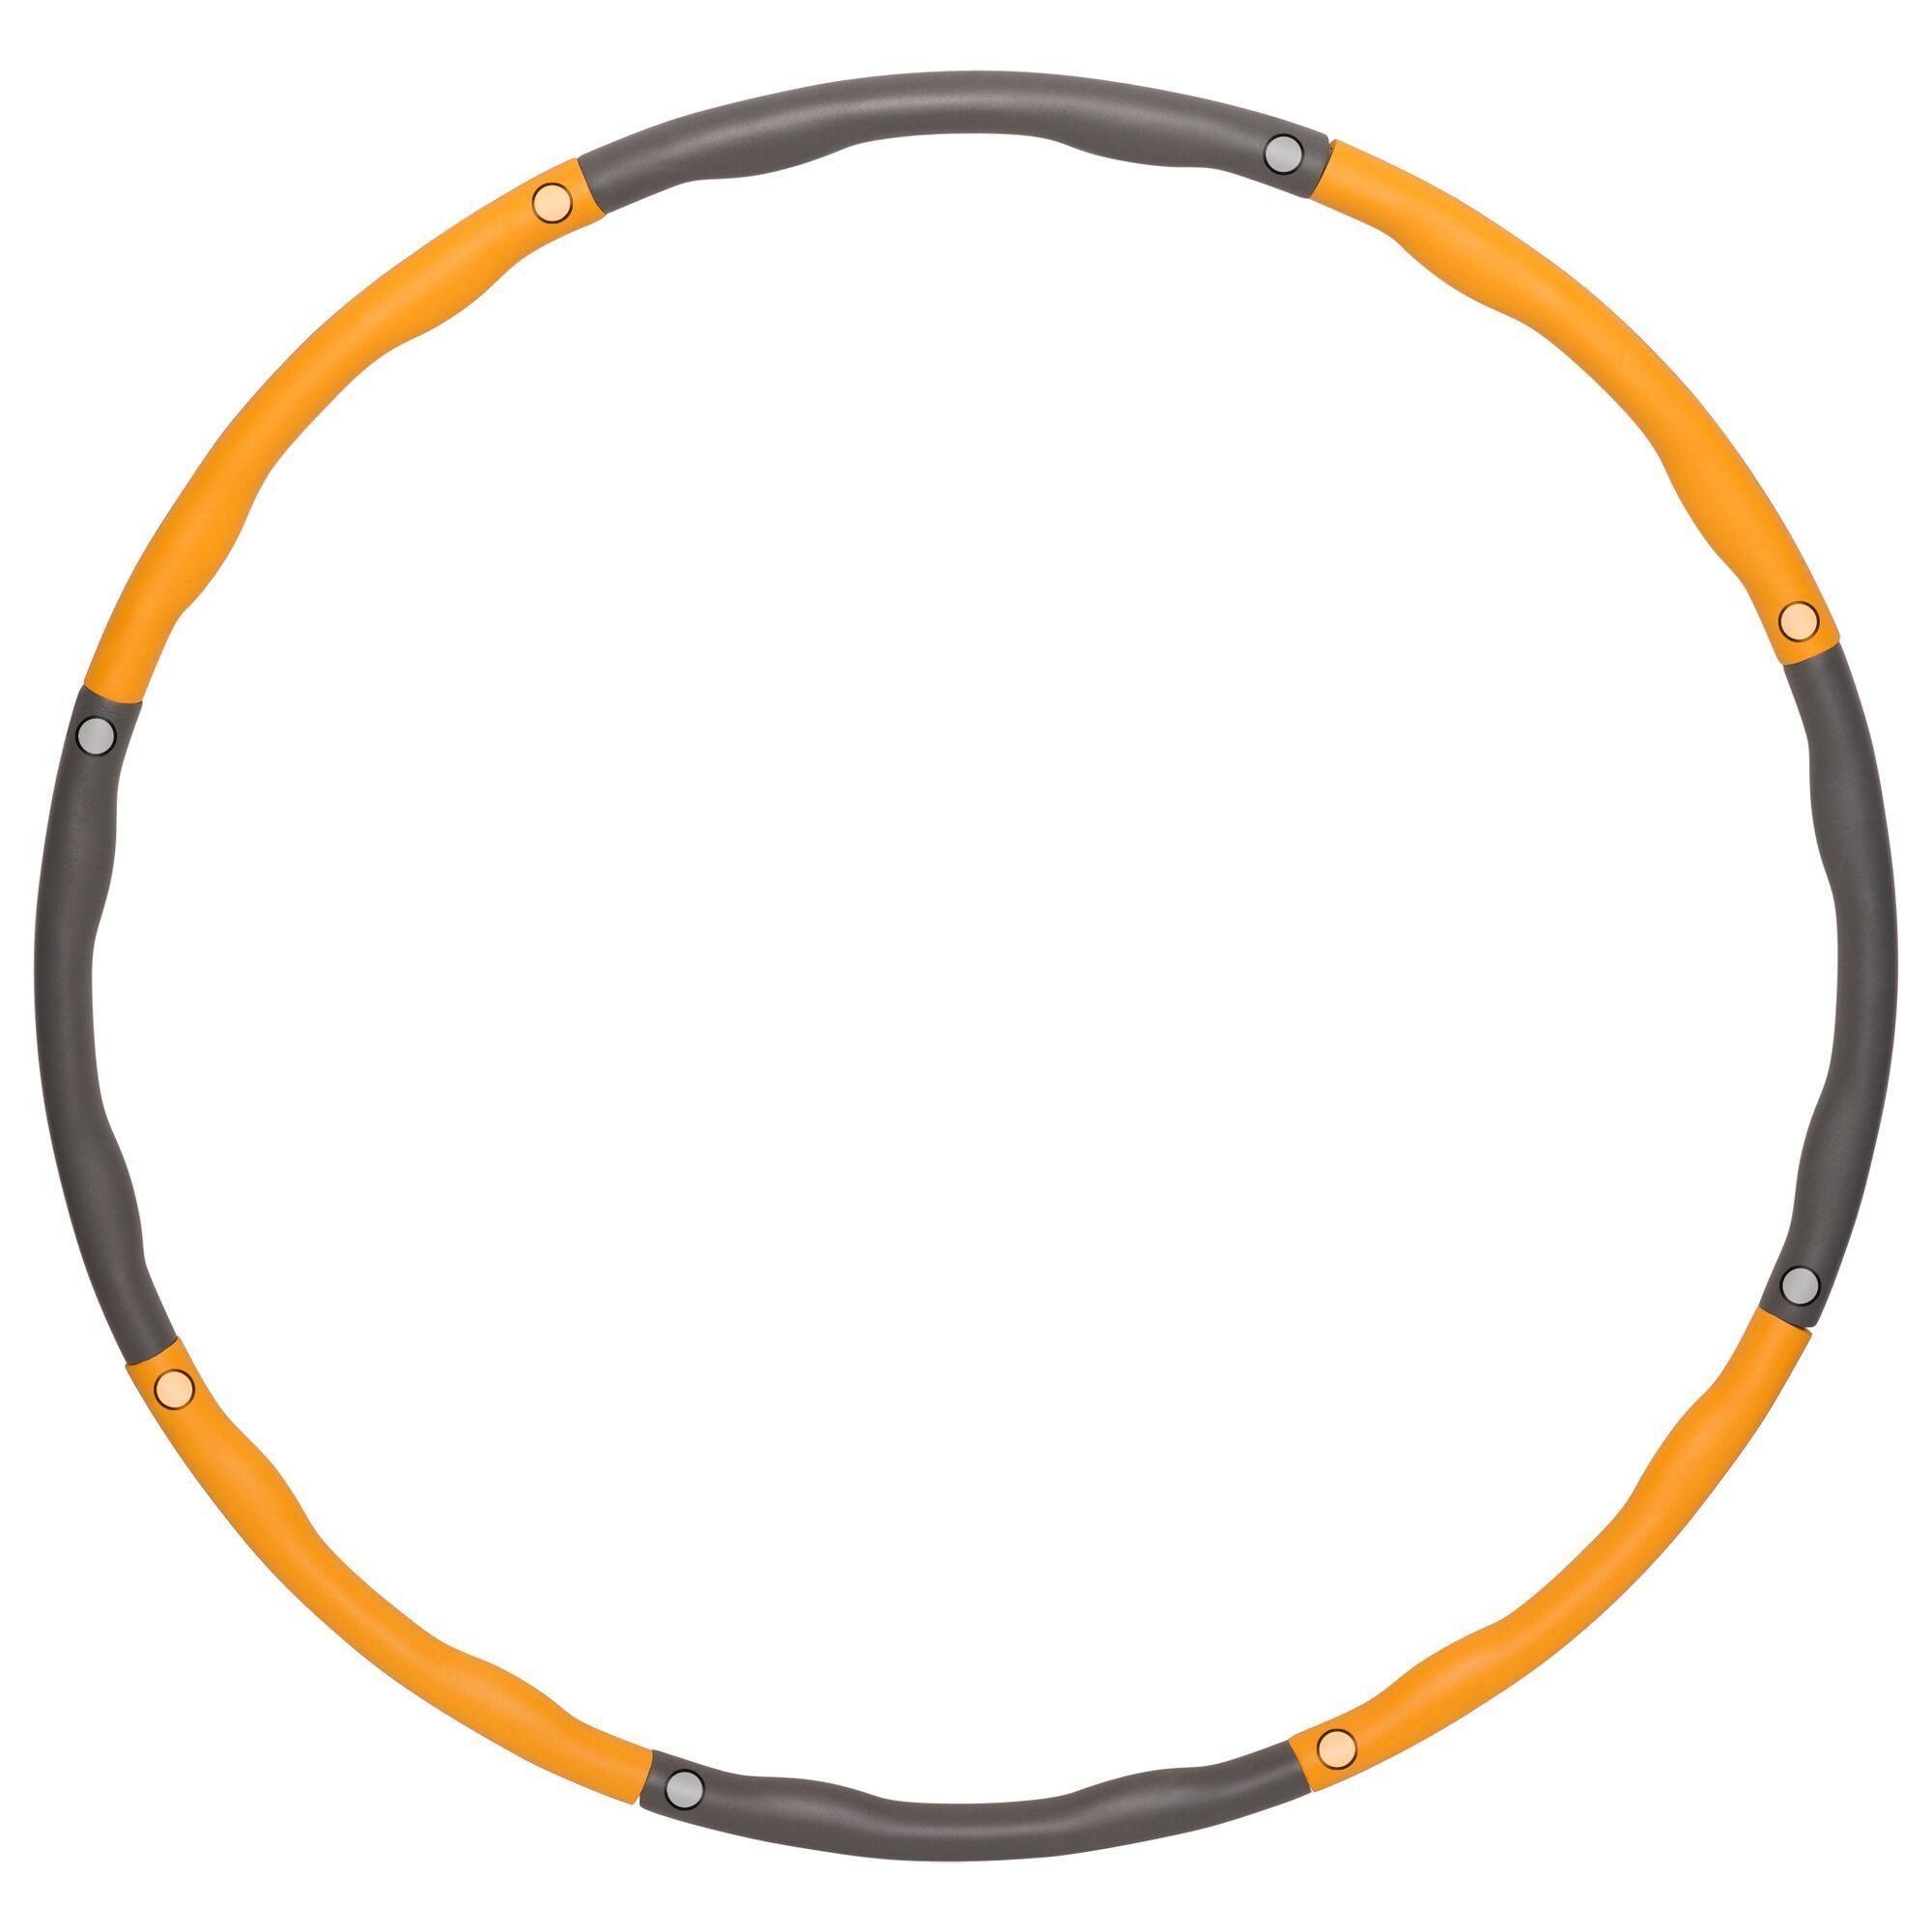 Fitness Hoola Hoop Plus Size & Detachable Design for Fat Burning Workout SUPWISH Exercise Hula Hoop for Adults Women Weight Loss 